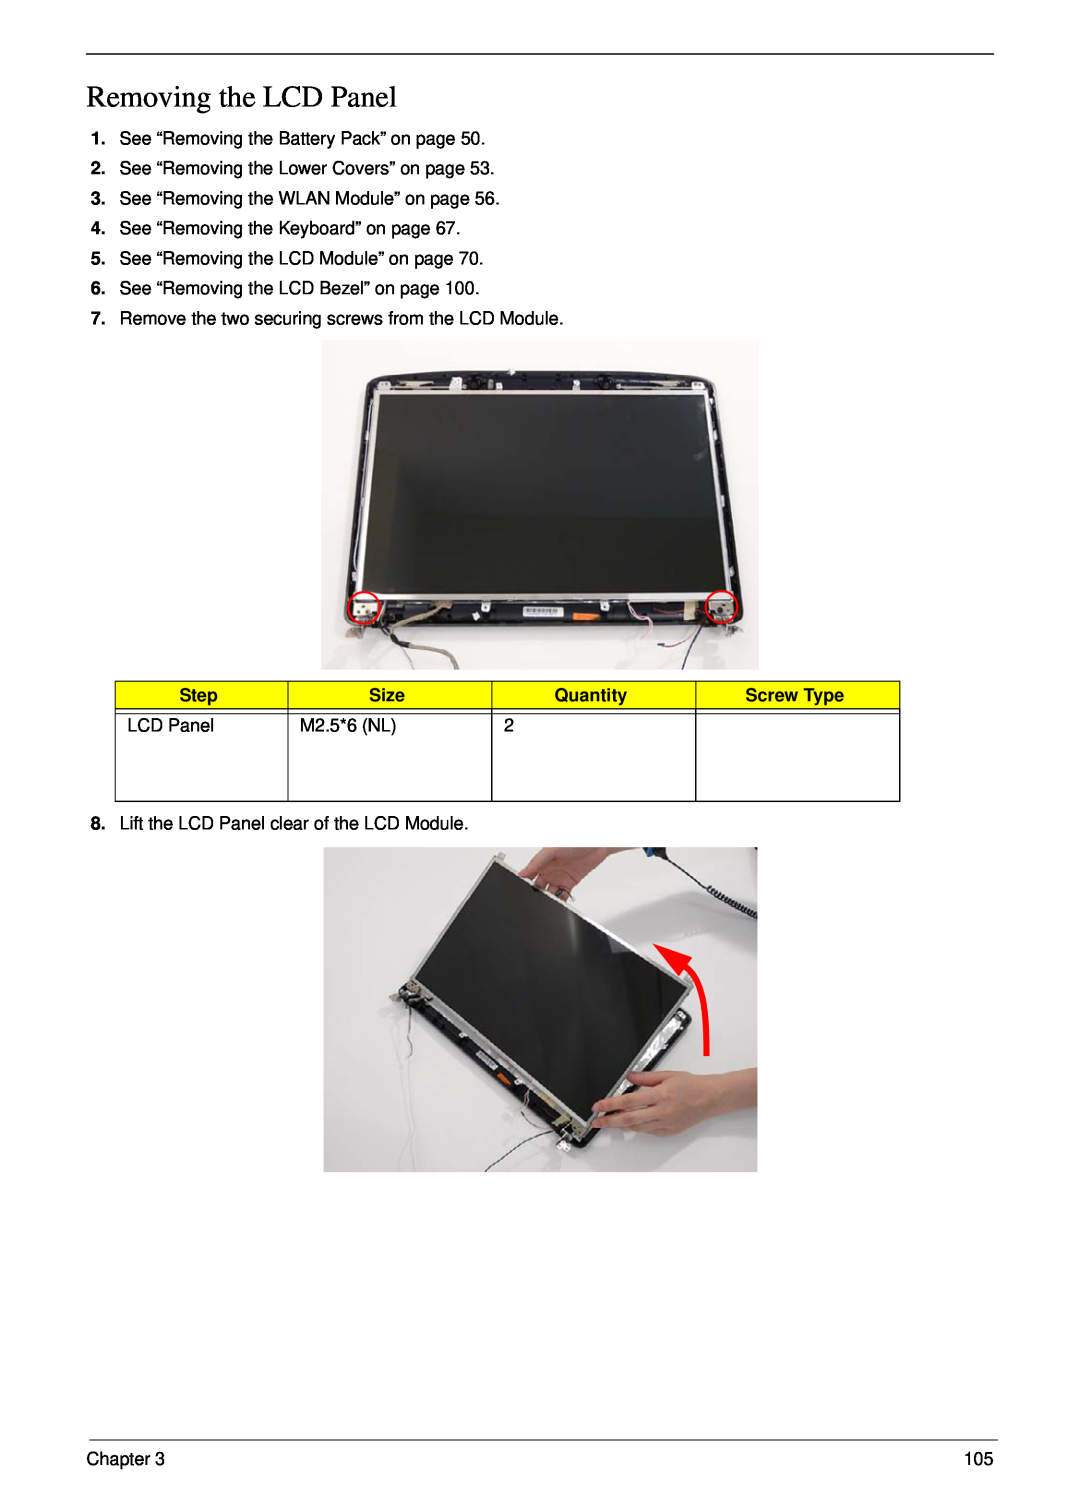 Acer 5530G manual Removing the LCD Panel, Step, Size, Quantity, Screw Type, M2.5*6 NL 